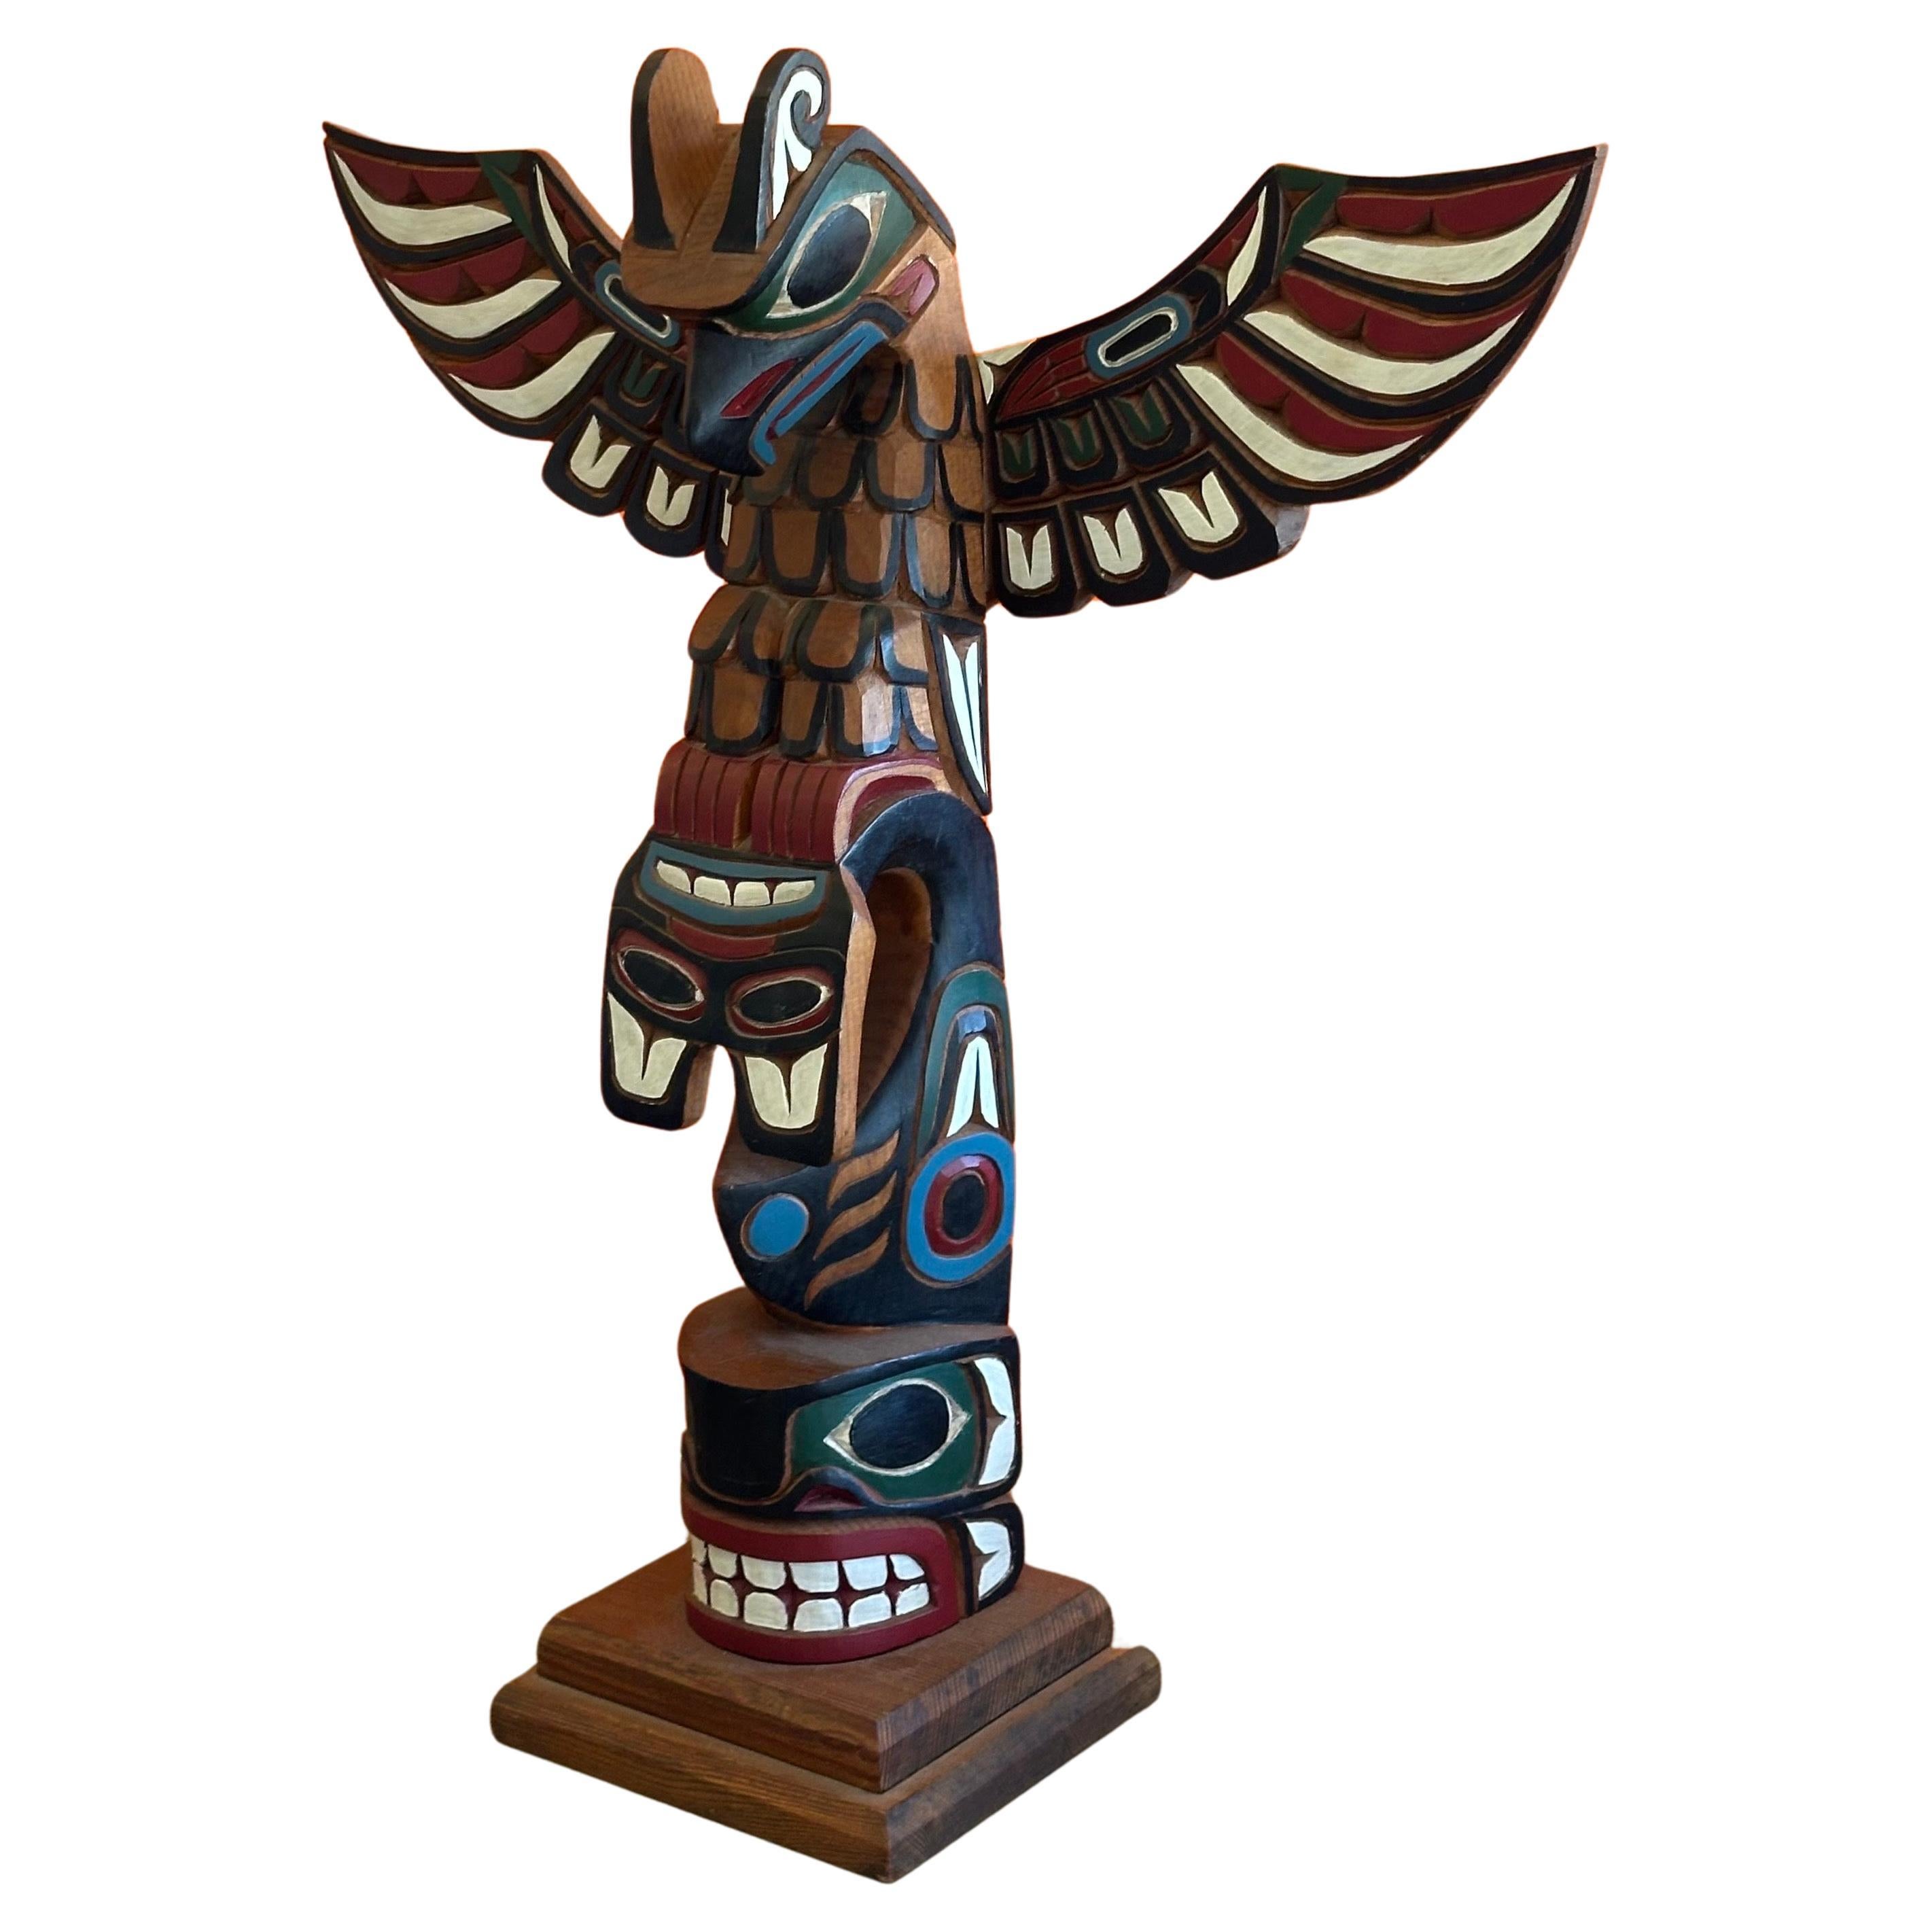  Northwest Coast American Indian Hand Carved Wood Totem Pole by Gary Rice For Sale